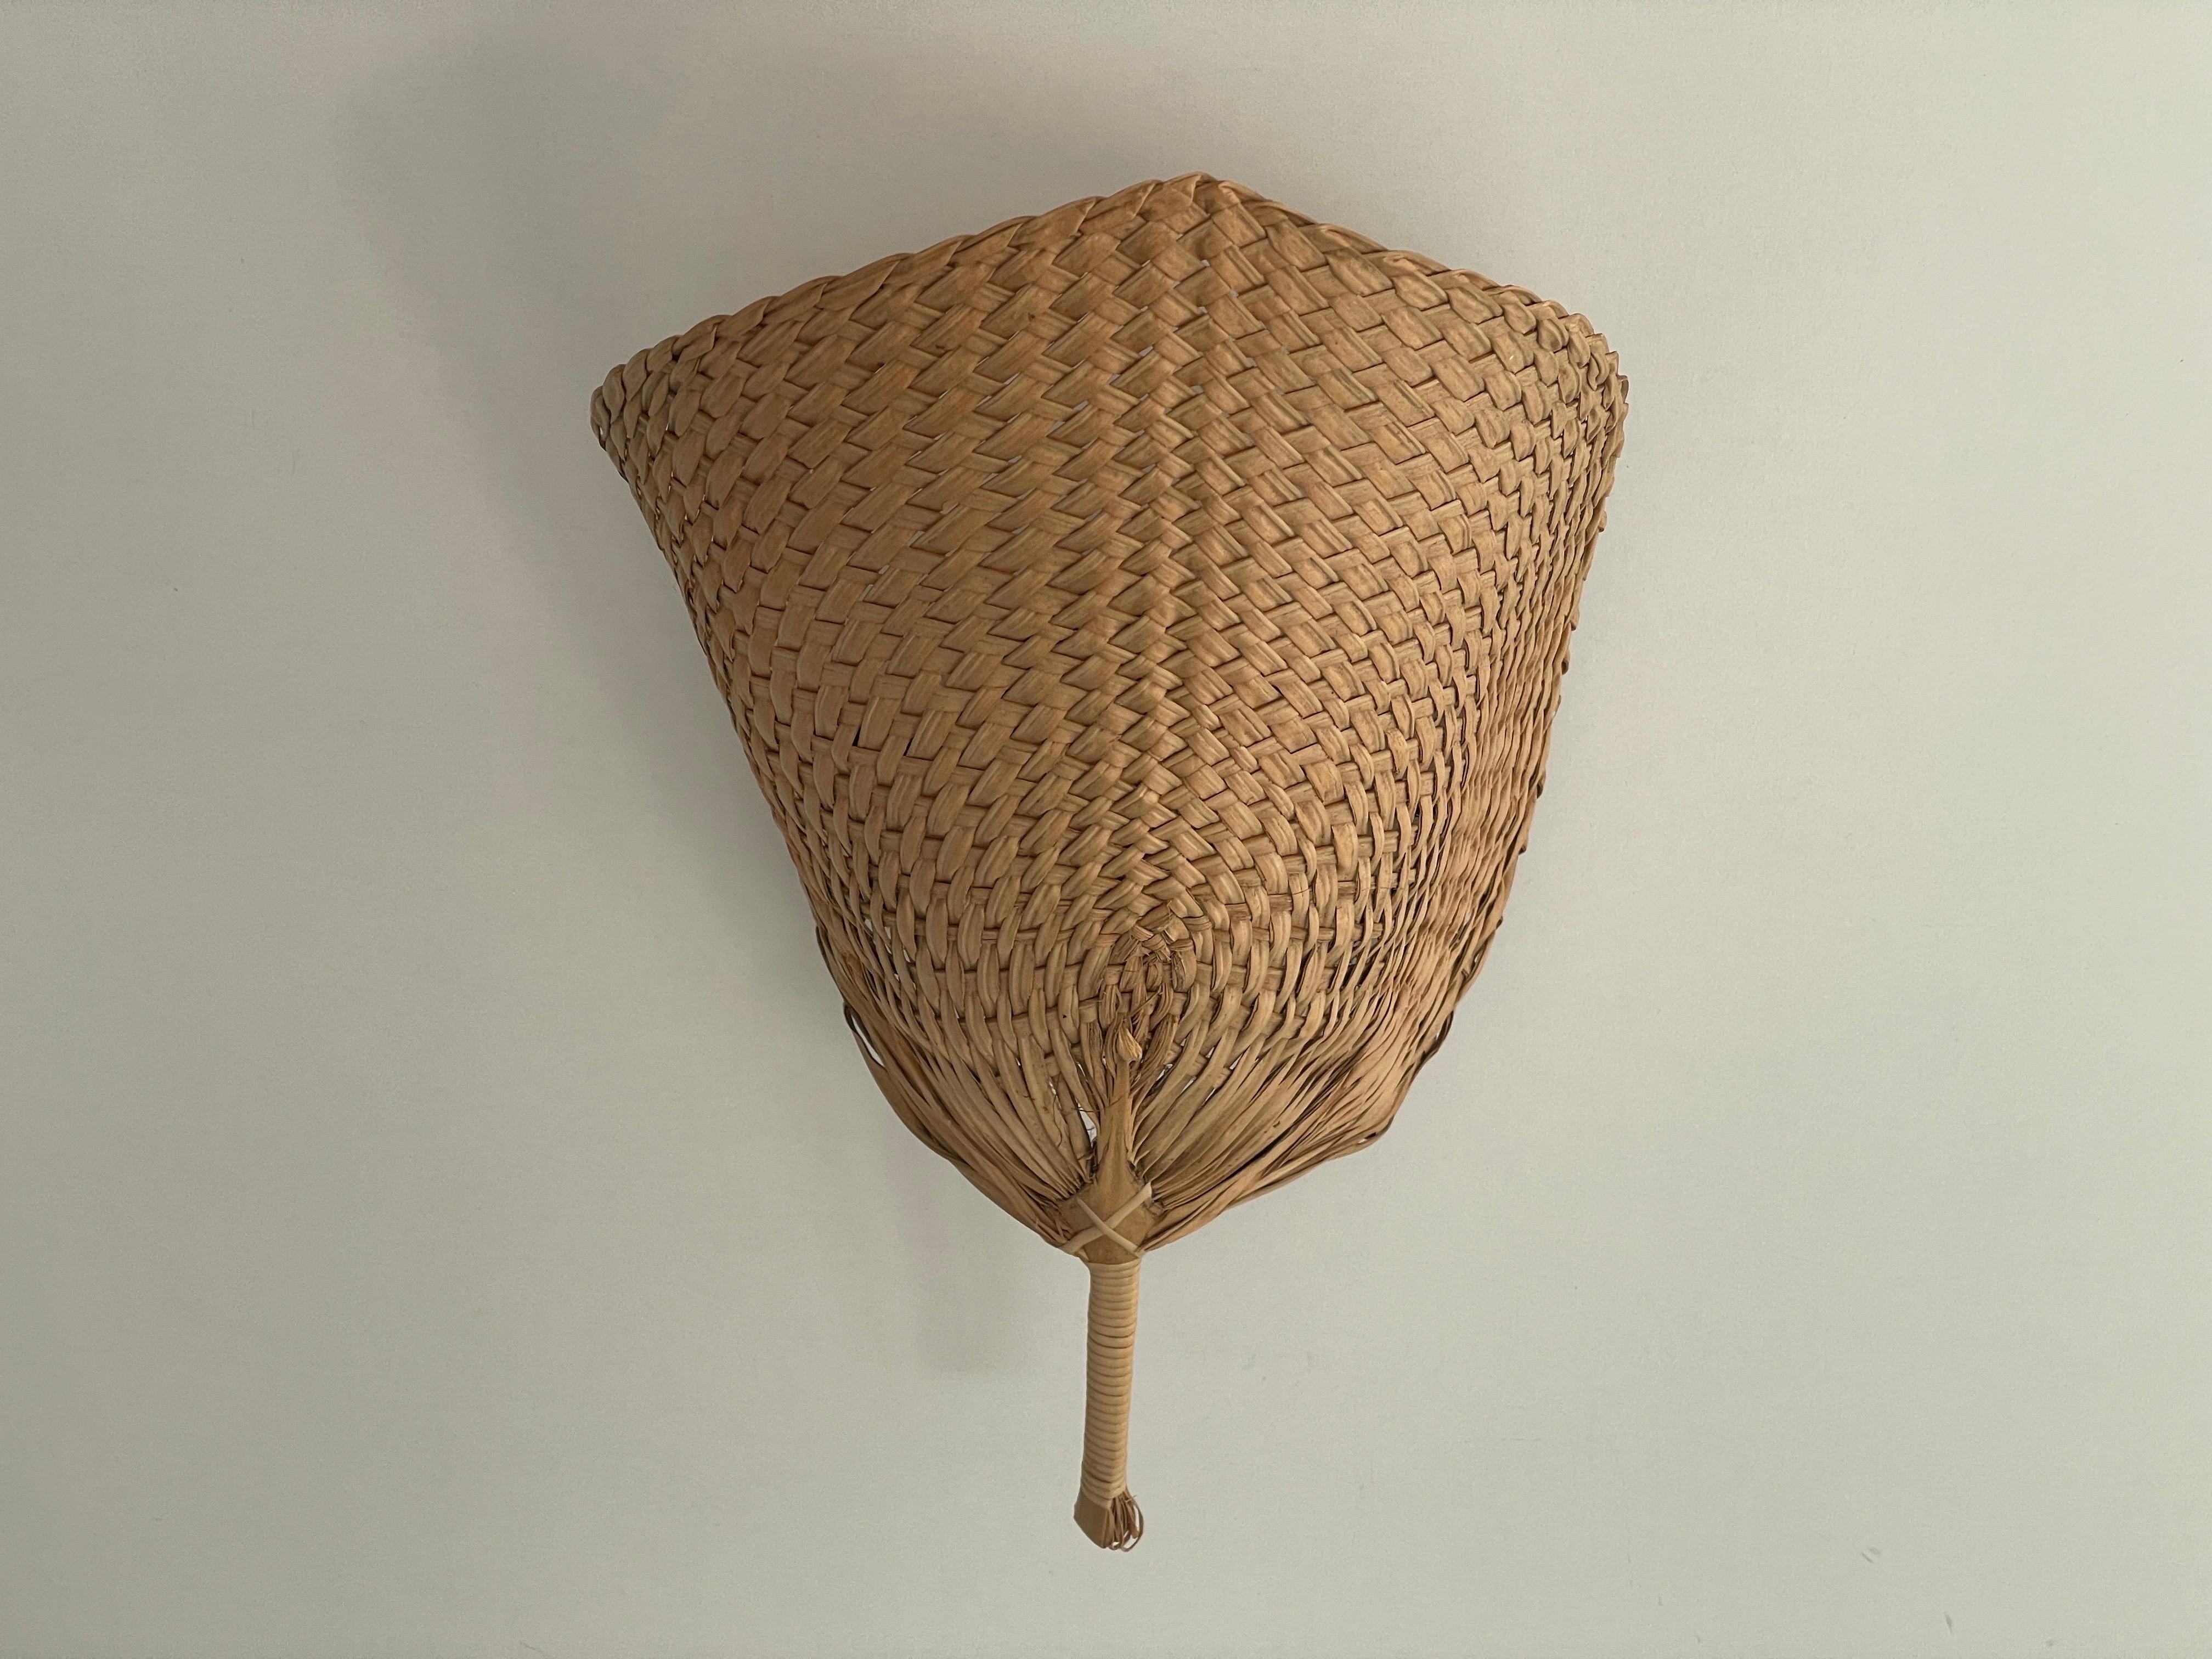 Hand-woven Wicker Palmate Leaf Design Single Sconce, 1960s, Germany

Lampshade is in very good vintage condition.
No crack, no missed piece.

This lamp works with E14 light bulb. Max 100W
Wired and suitable to use with 220V and 110V for all